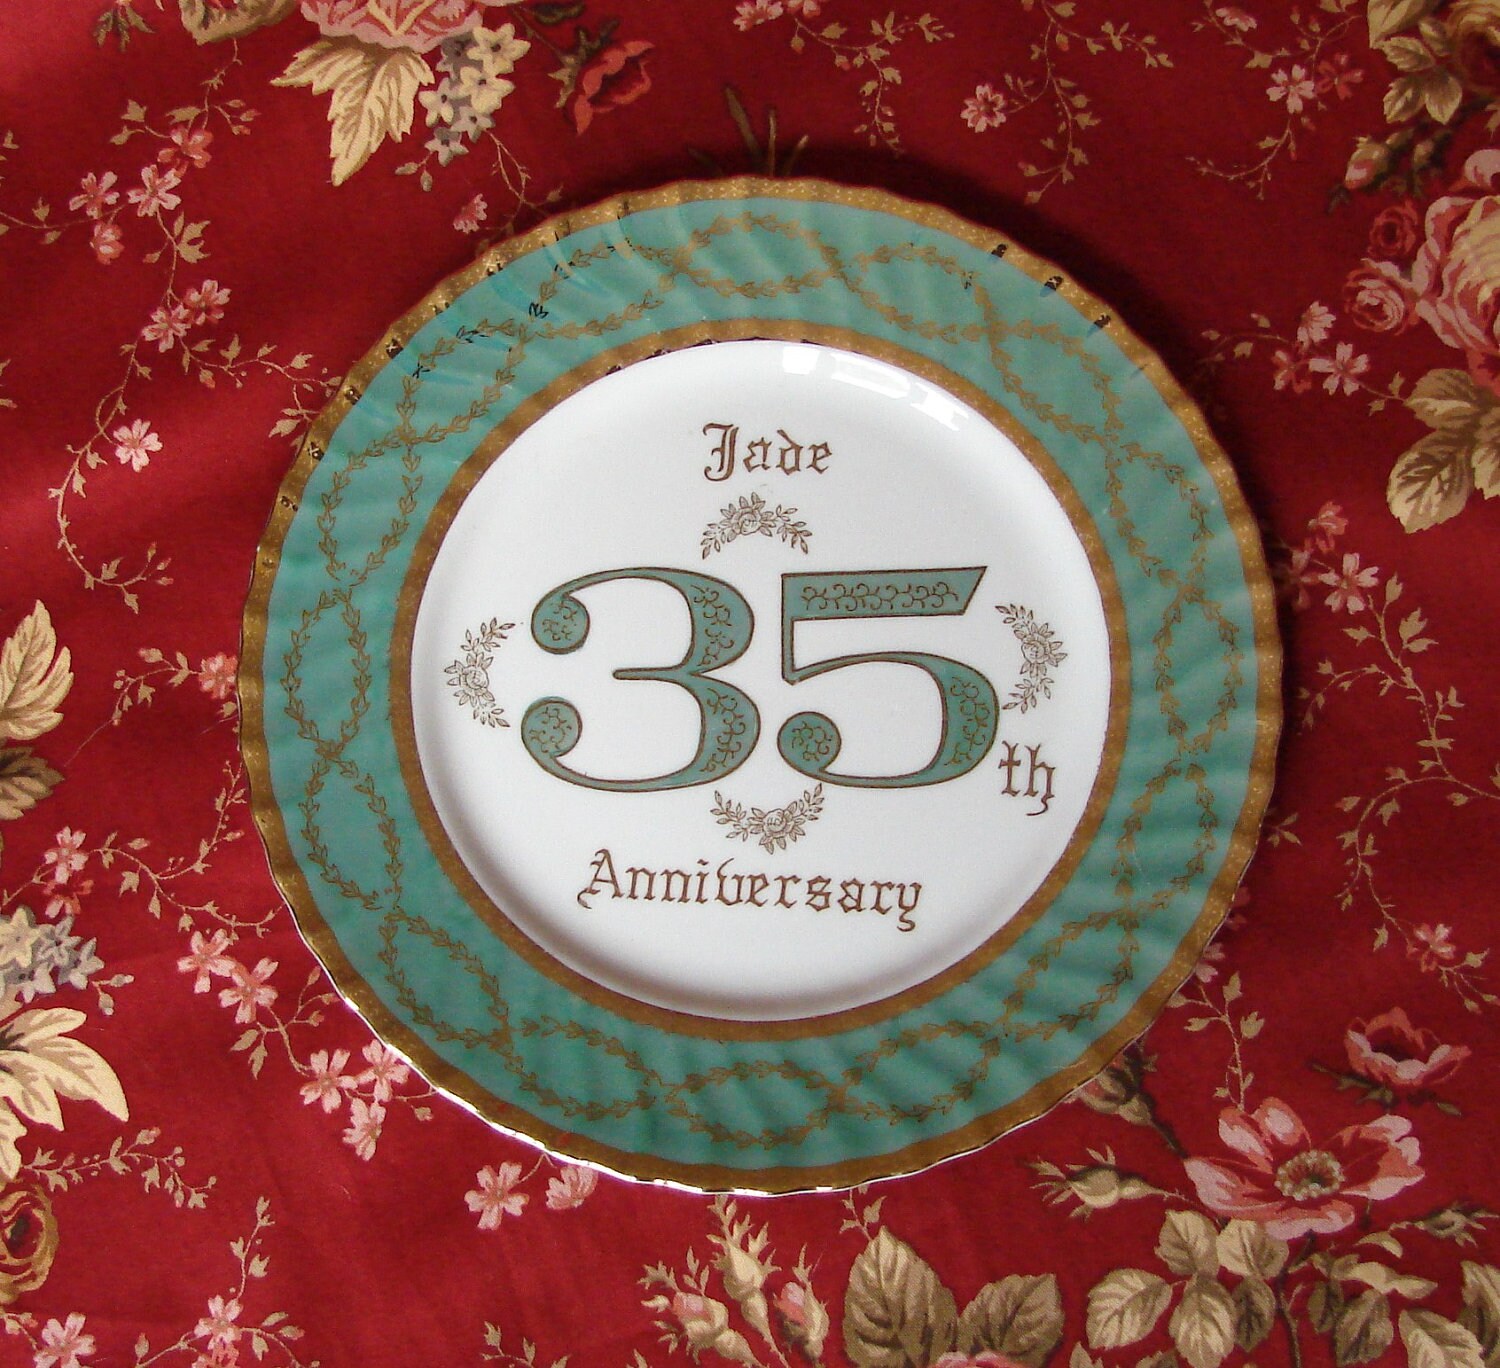 Jade Anniversary Gifts
 35th Anniversary Plate Jade Anniversary Gold Trimmed Plate